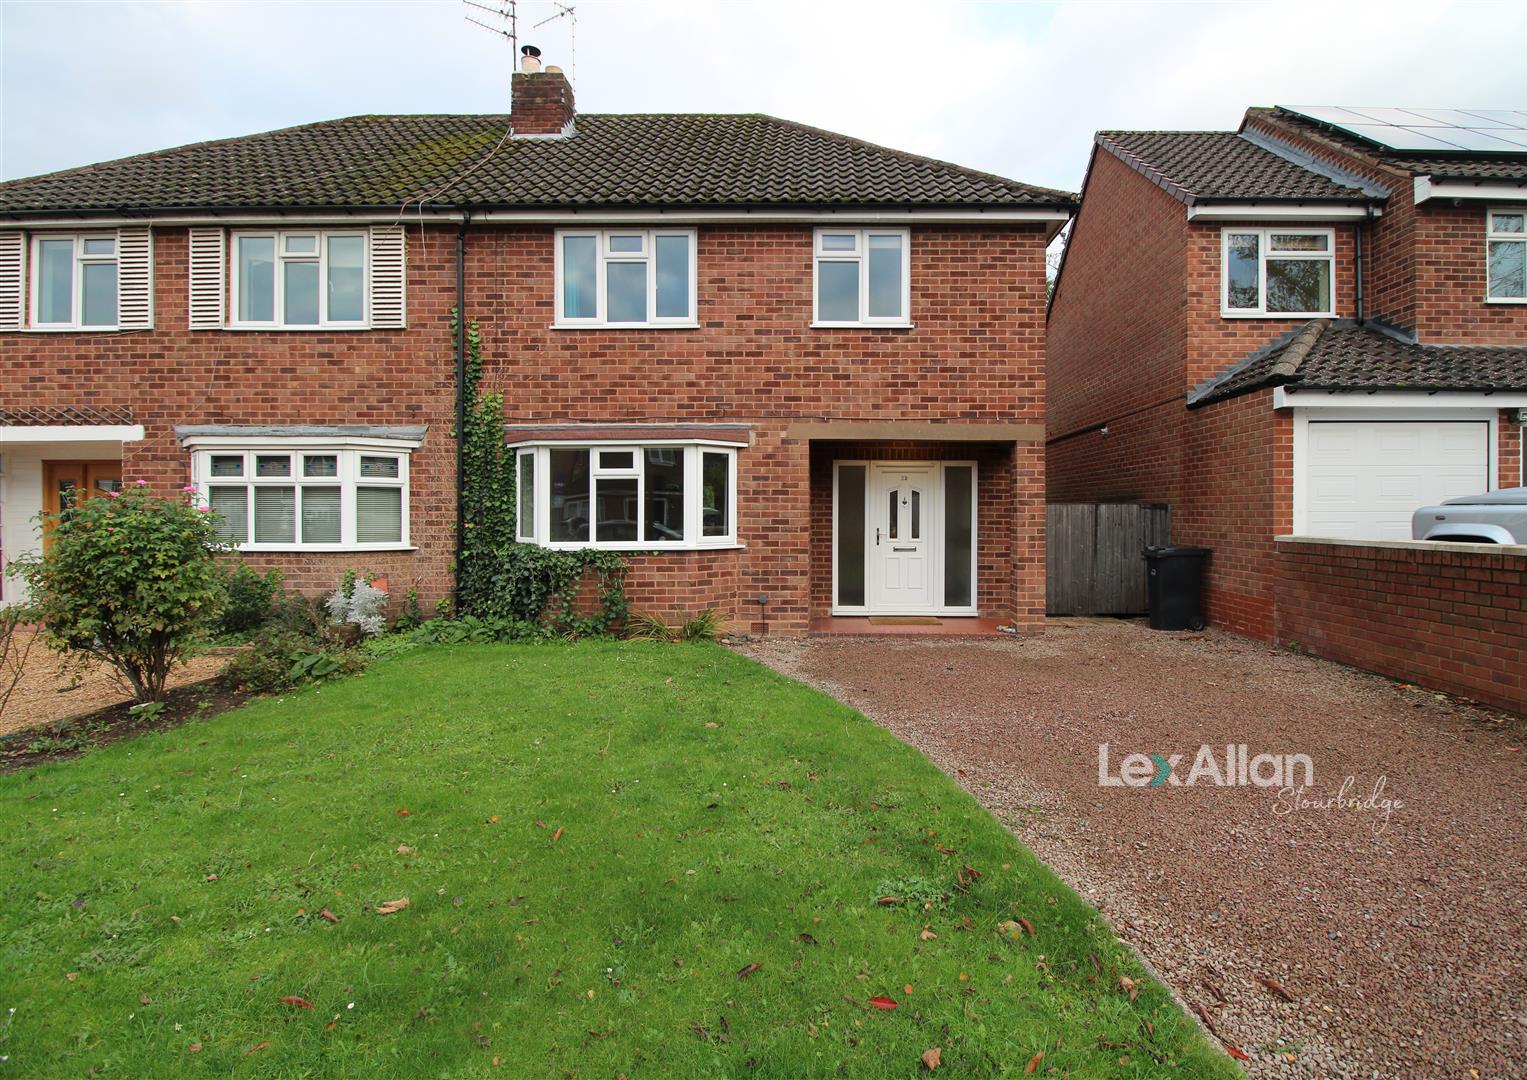 3 bed  for sale in Castle Grove, Stourbridge, DY8 